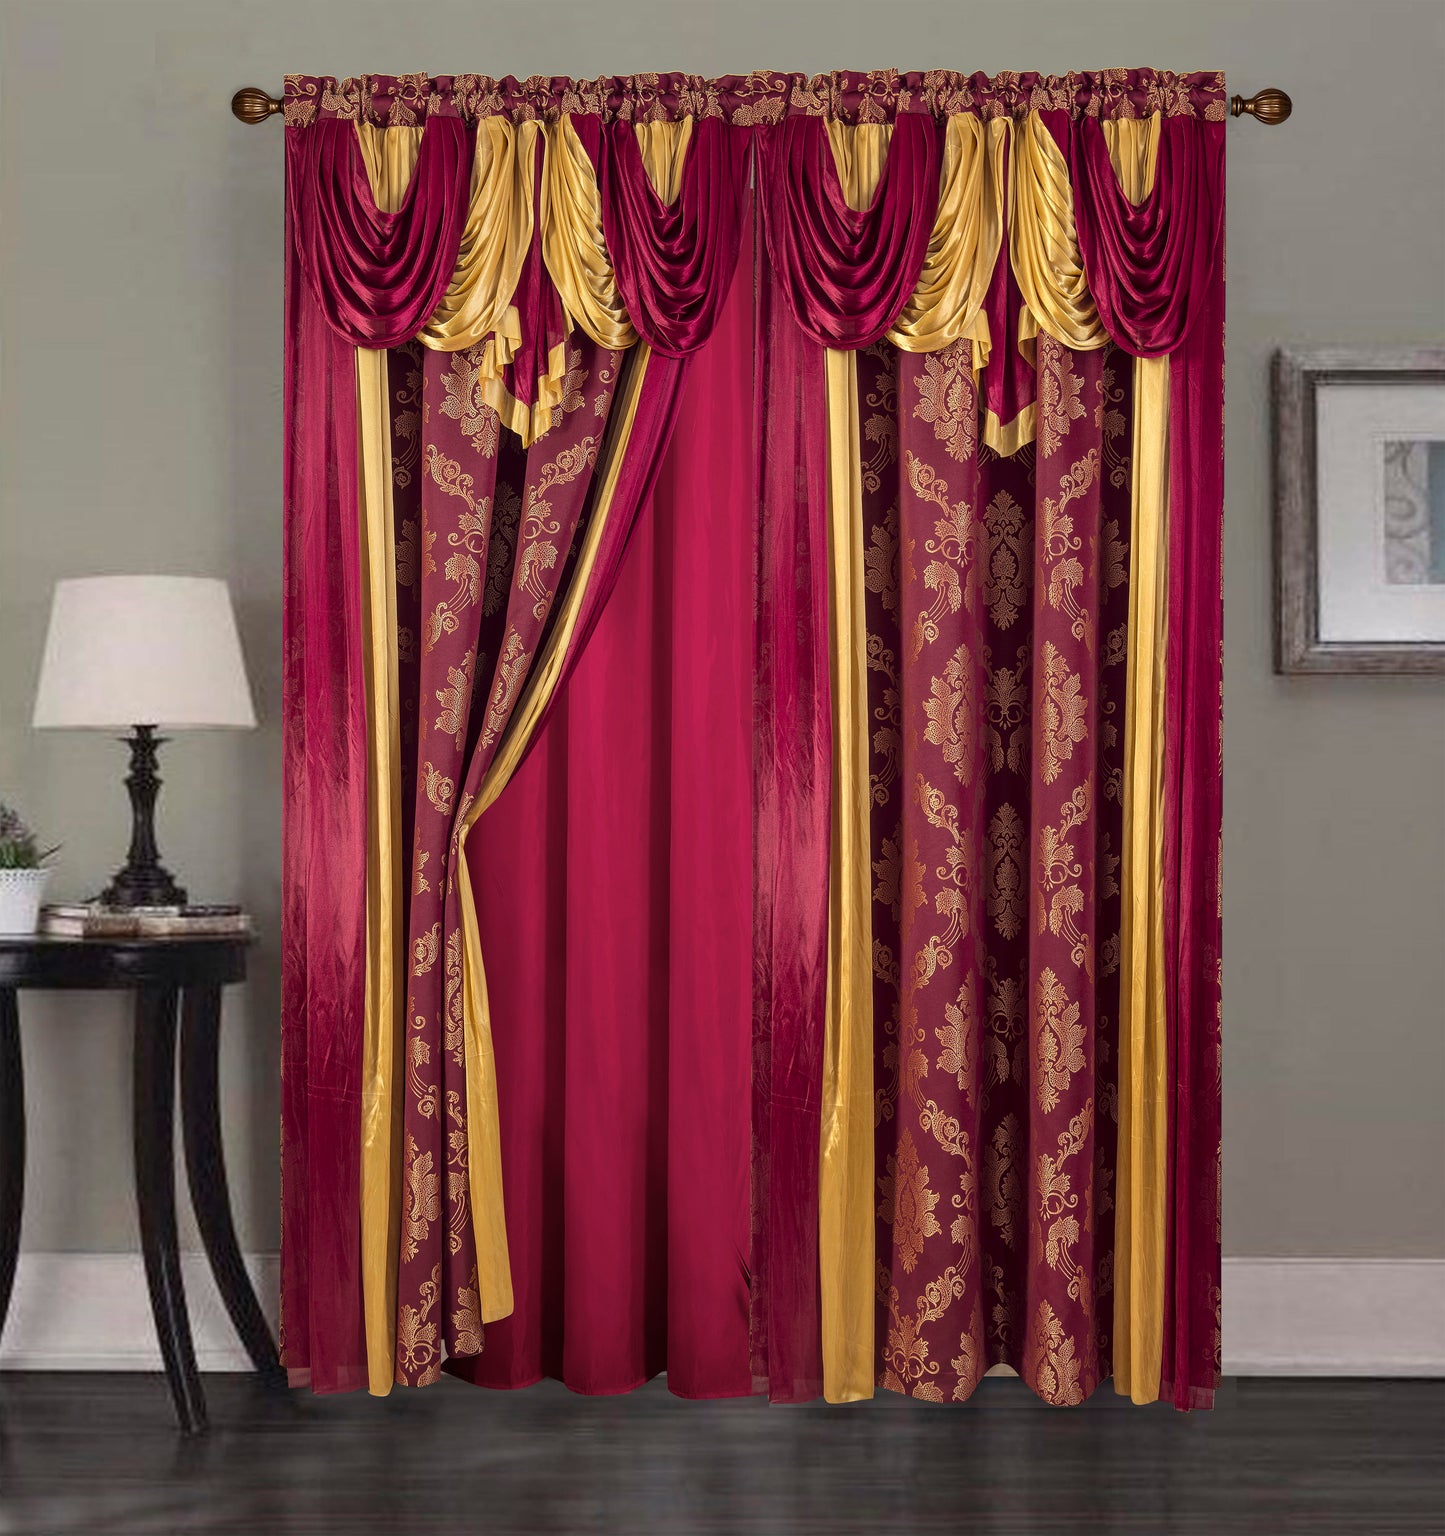 2PC CURTAIN SET W/ ATTACHED VALANCE & BACKING - Liliana